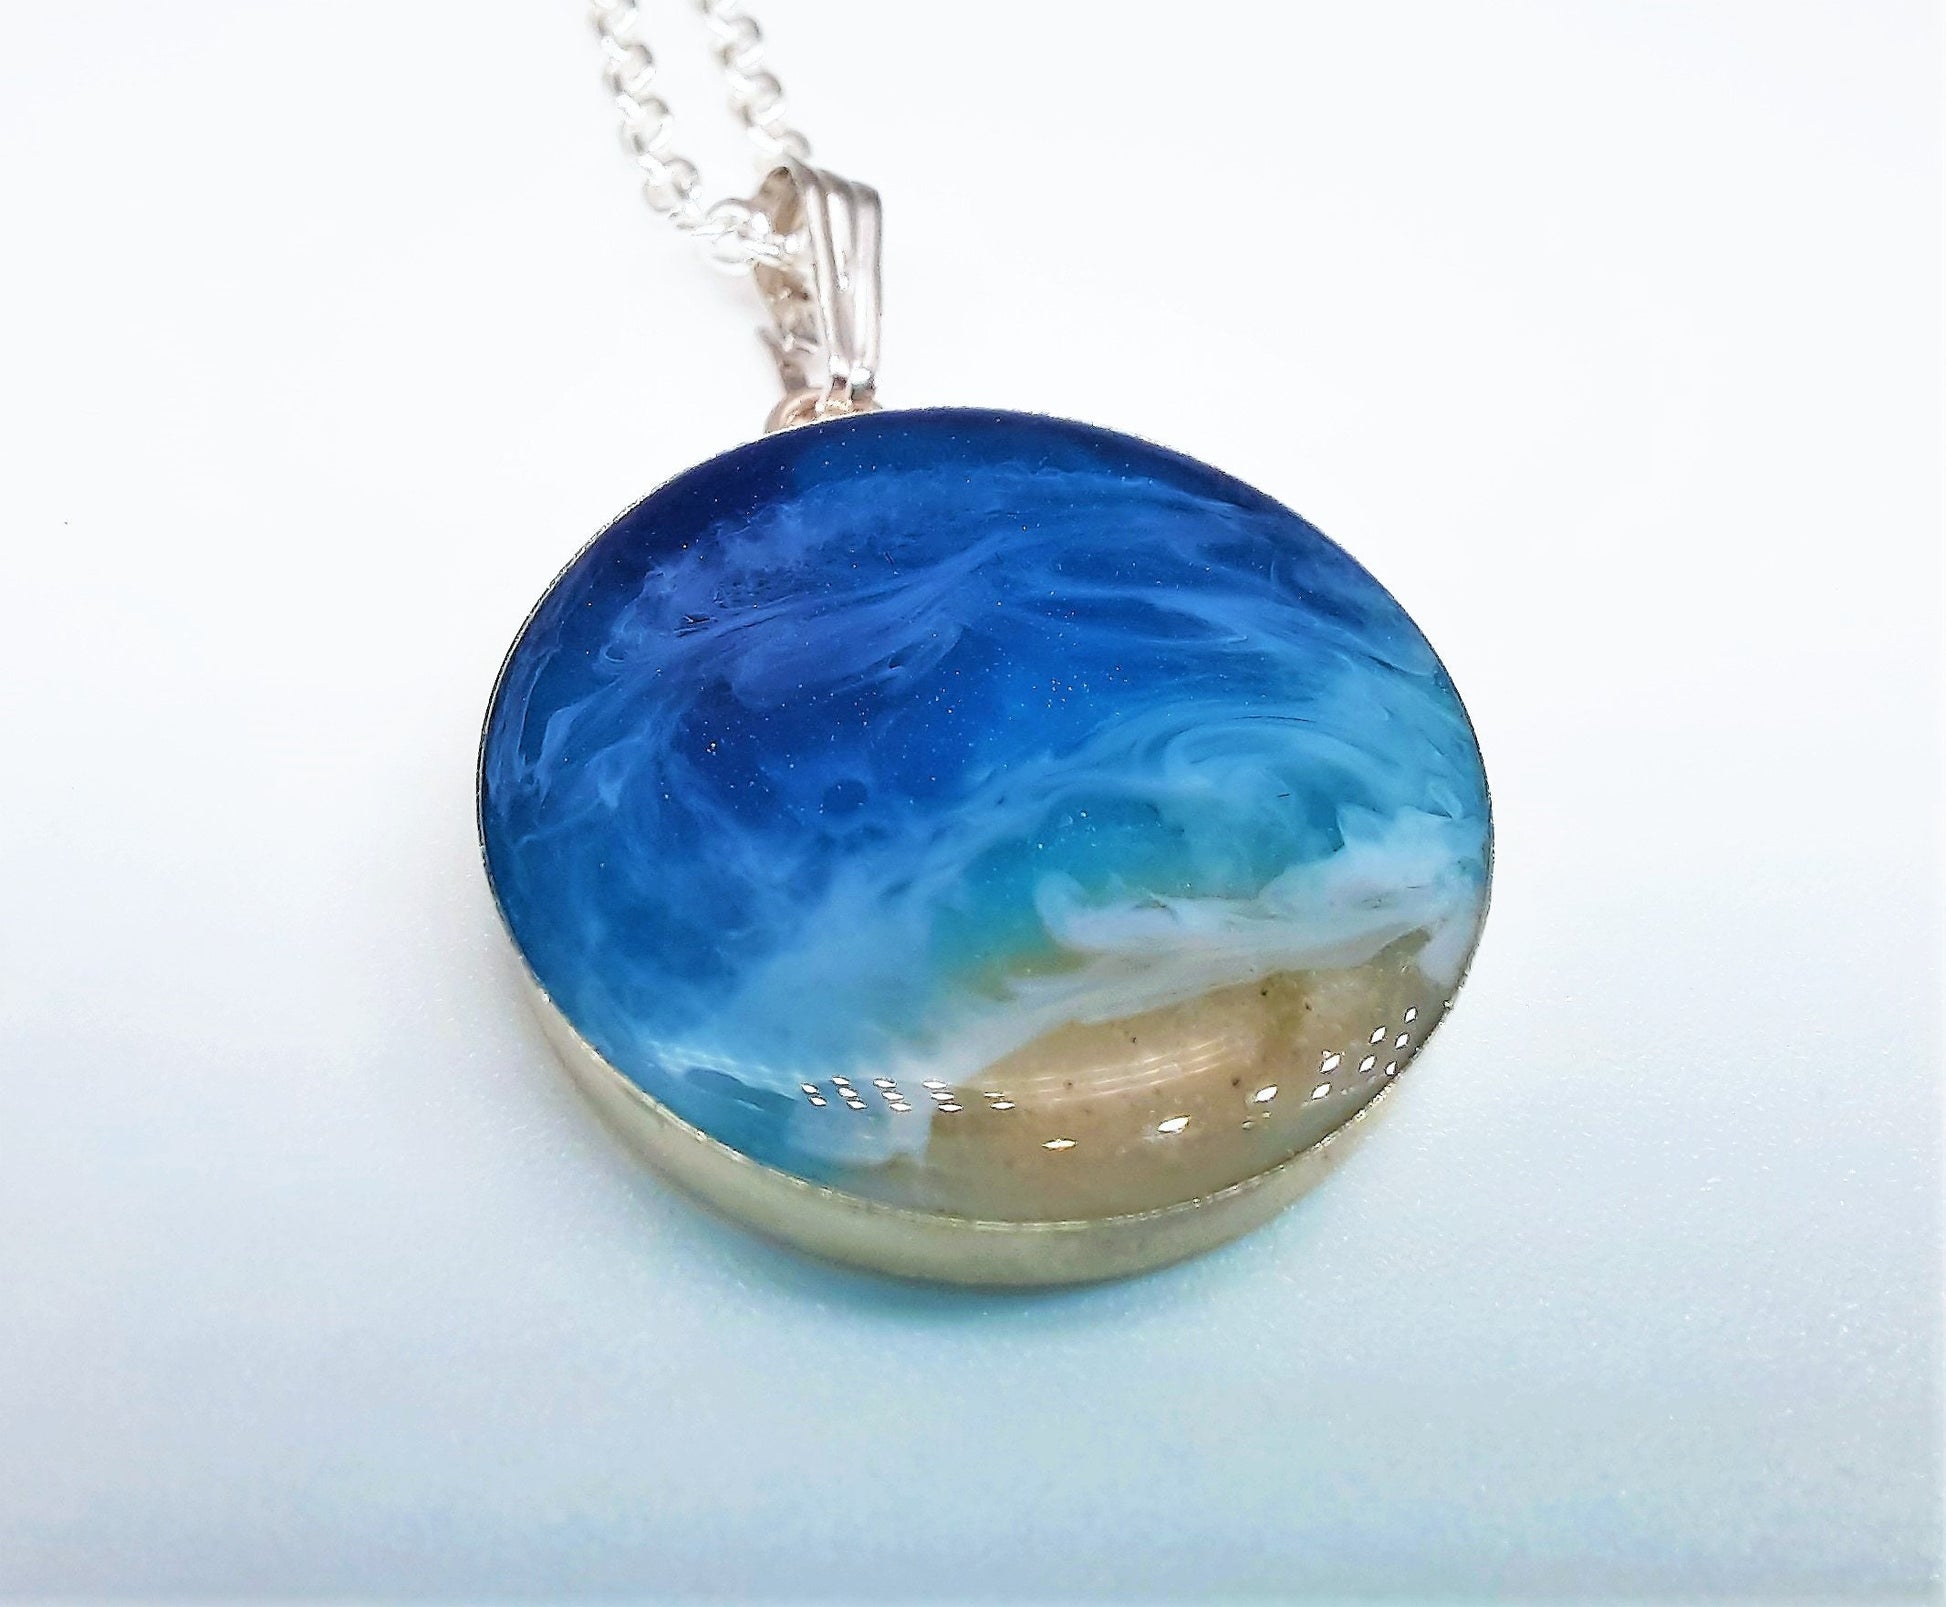 Handmade 925 Sterling Silver Resin Waves Ocean Pendant Necklace, Beach Scene, Made with Real Sand, Resin, and Mica - NOT A PHOTOGRAPH!